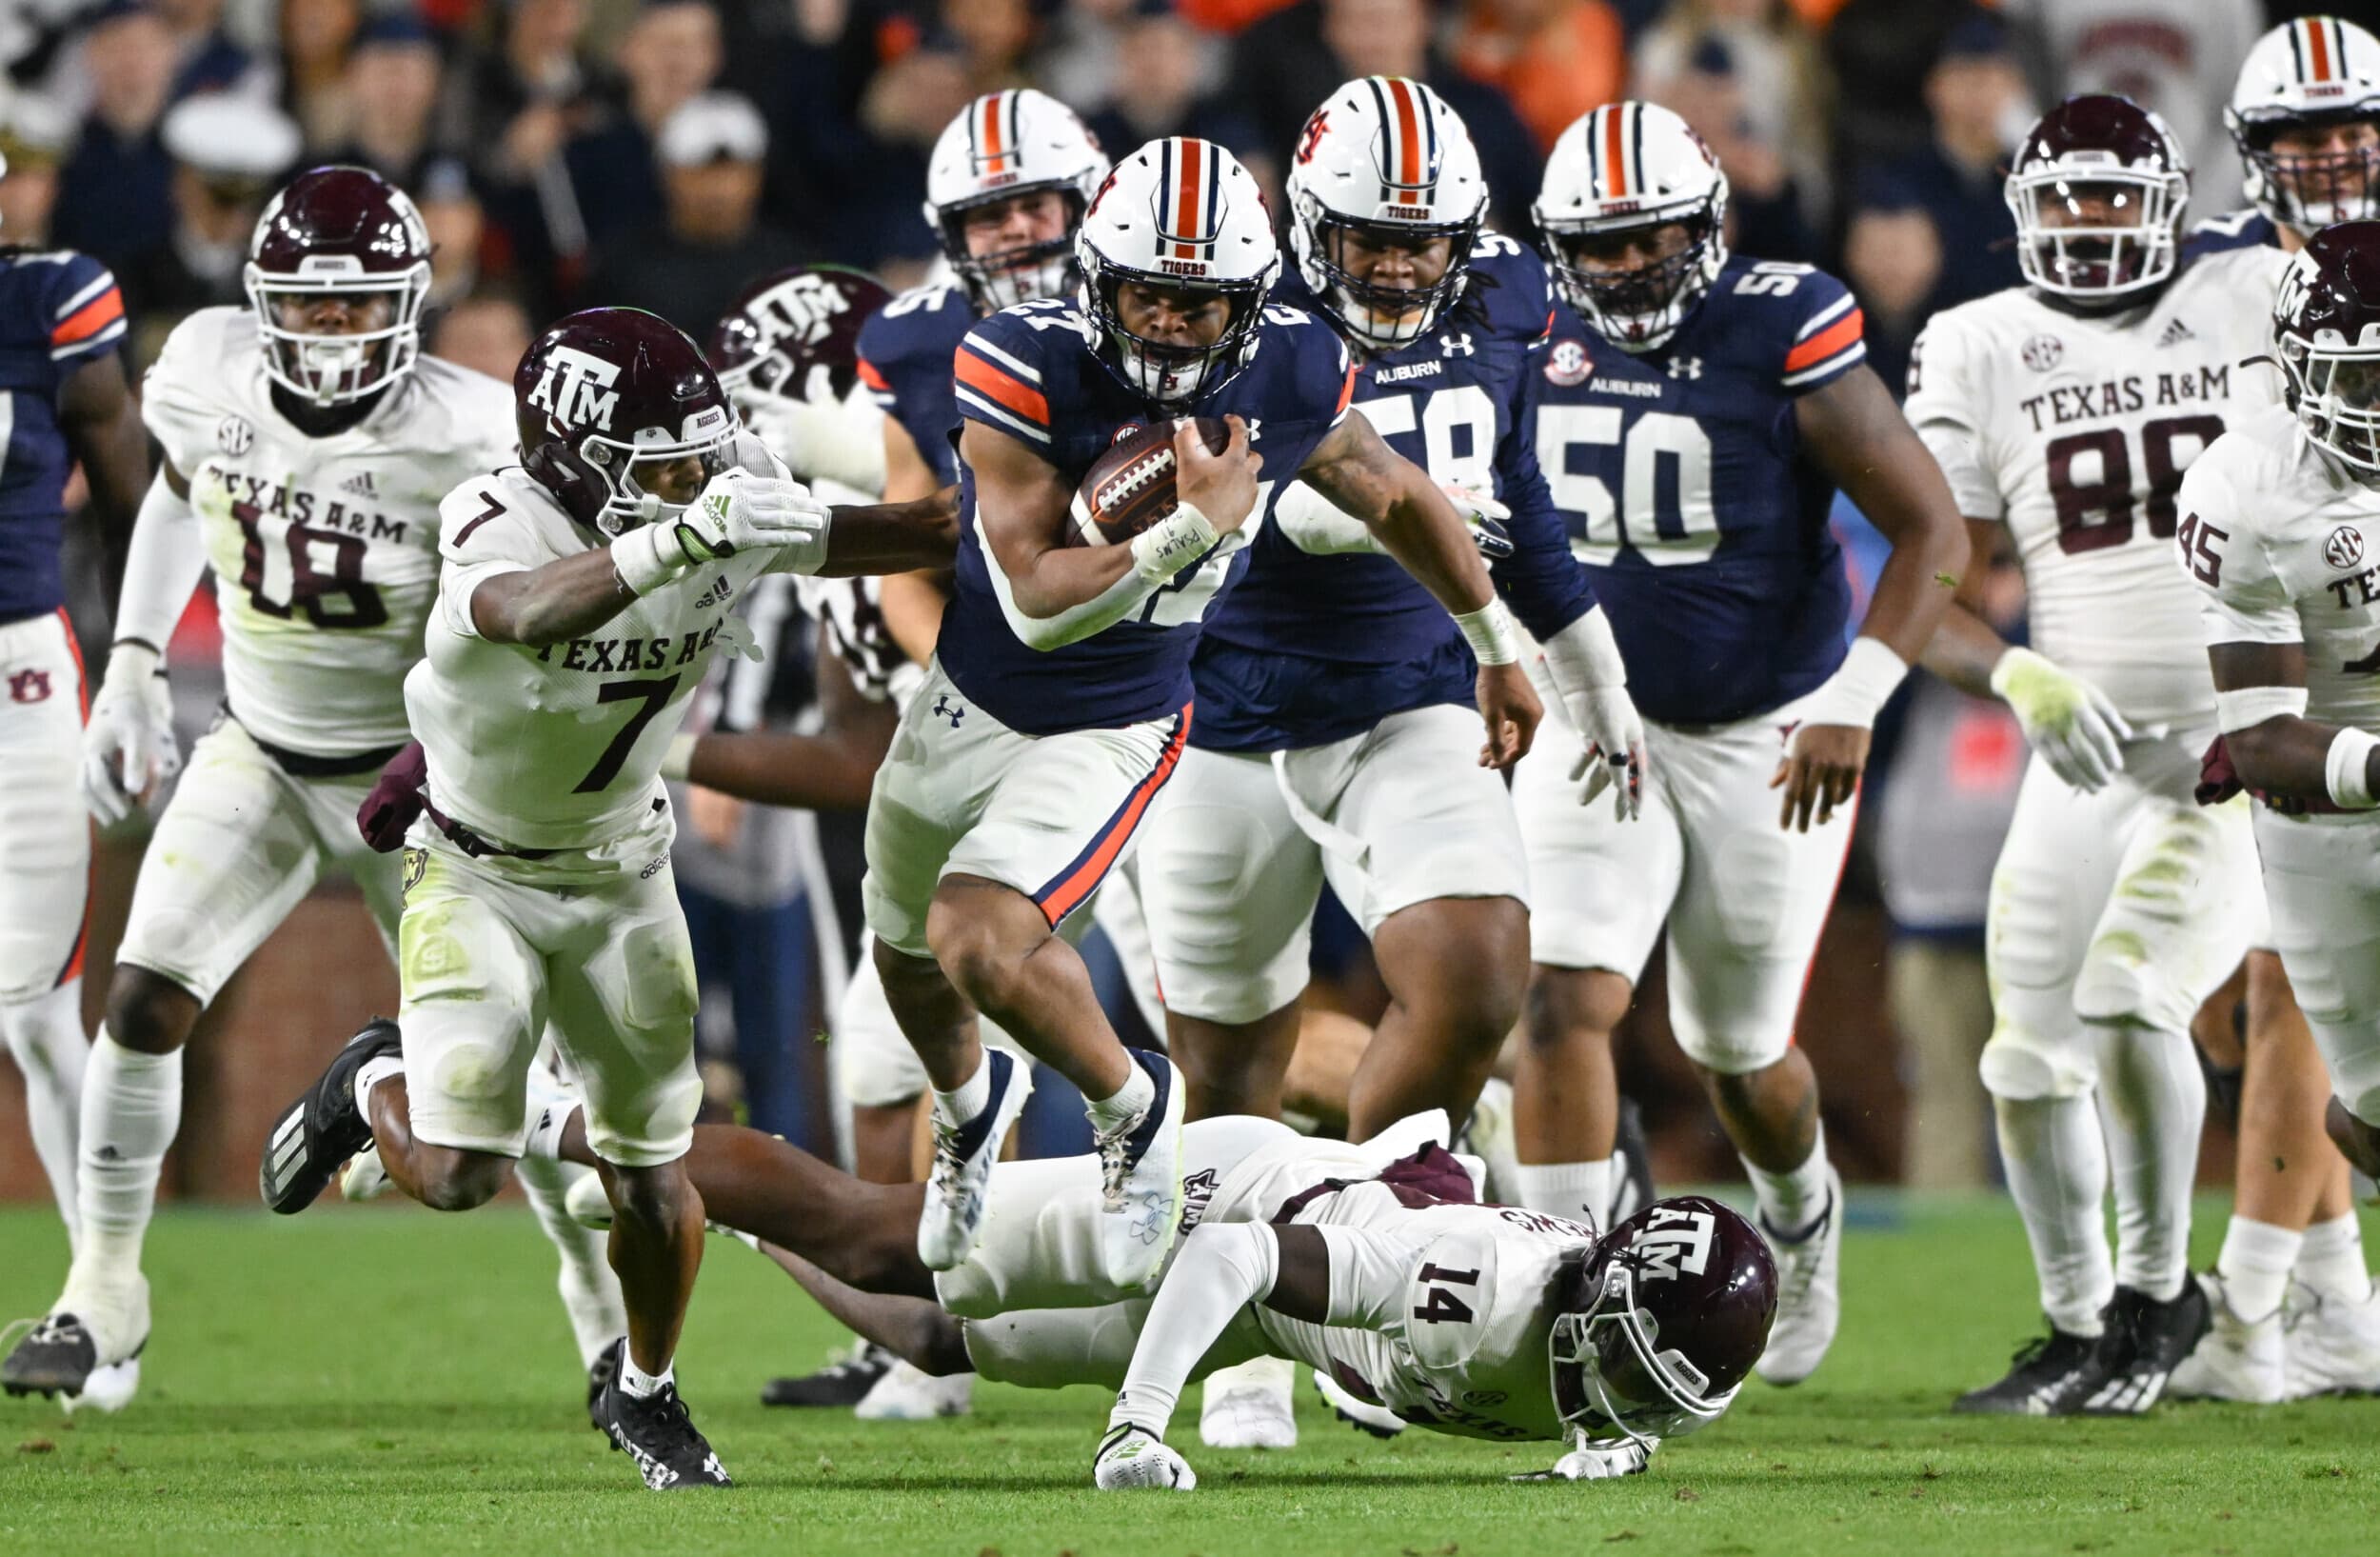 Jarquez Hunter (27) carry during the Football Game between the Auburn Tigers and Texas A&M Aggies at Jordan-Hare Stadium in Auburn, AL on Saturday, Nov 12, 2022. Todd Van Emst/Auburn Tigers